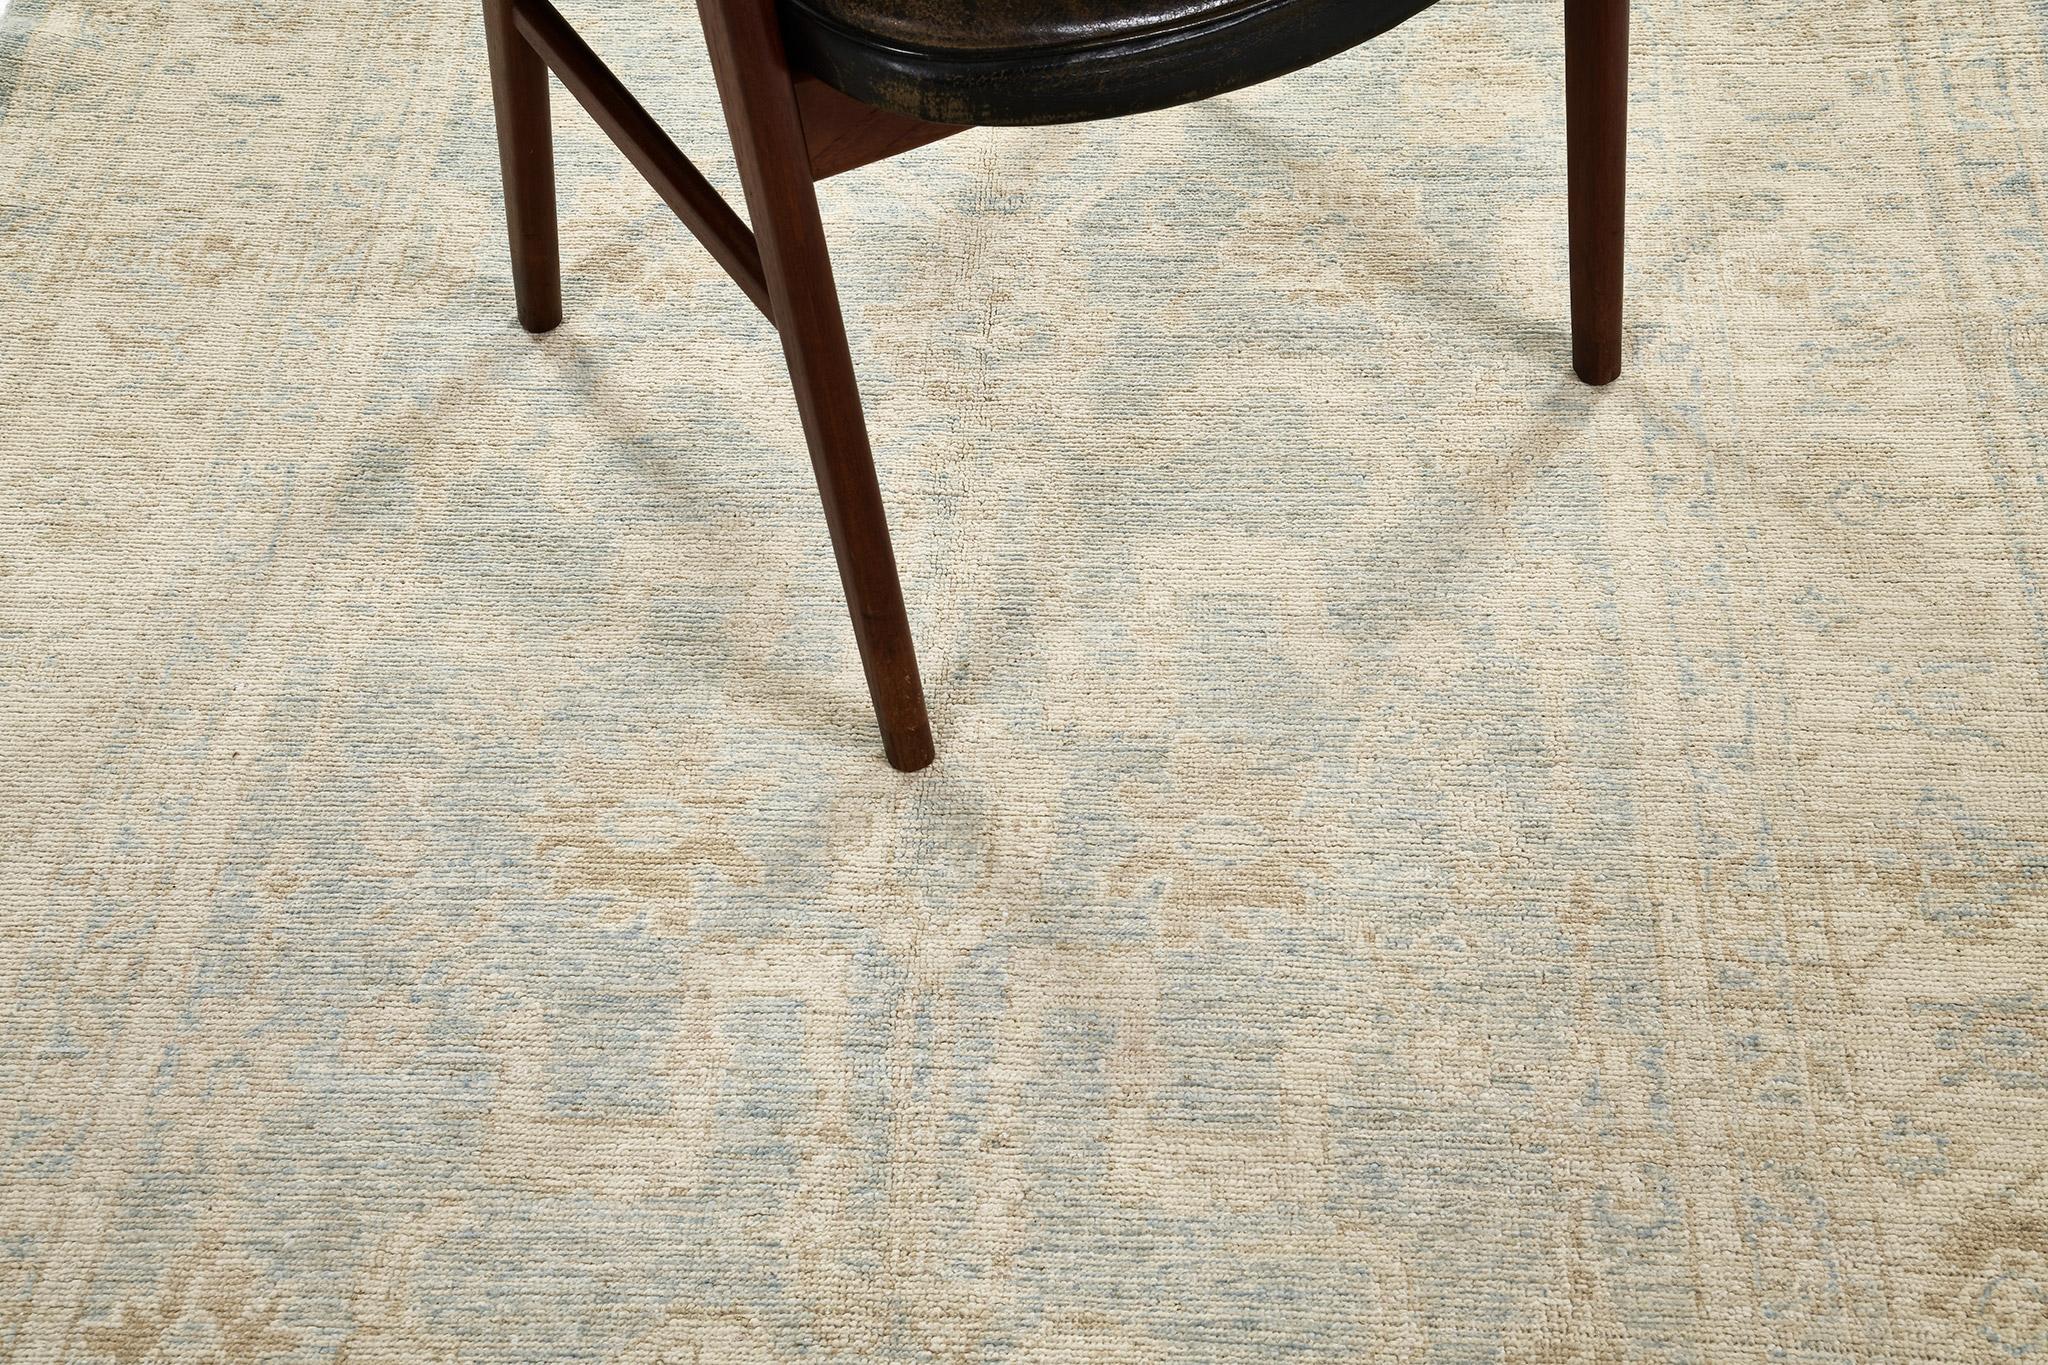 Featuring the fascinating tones of cerulean blue, gold and ivory, this Sultanabad rug in our Safira collection will definitely leave you in awe. The allover blooming patterns with gracefully strewn leafy tendrils are enclosed with alternating